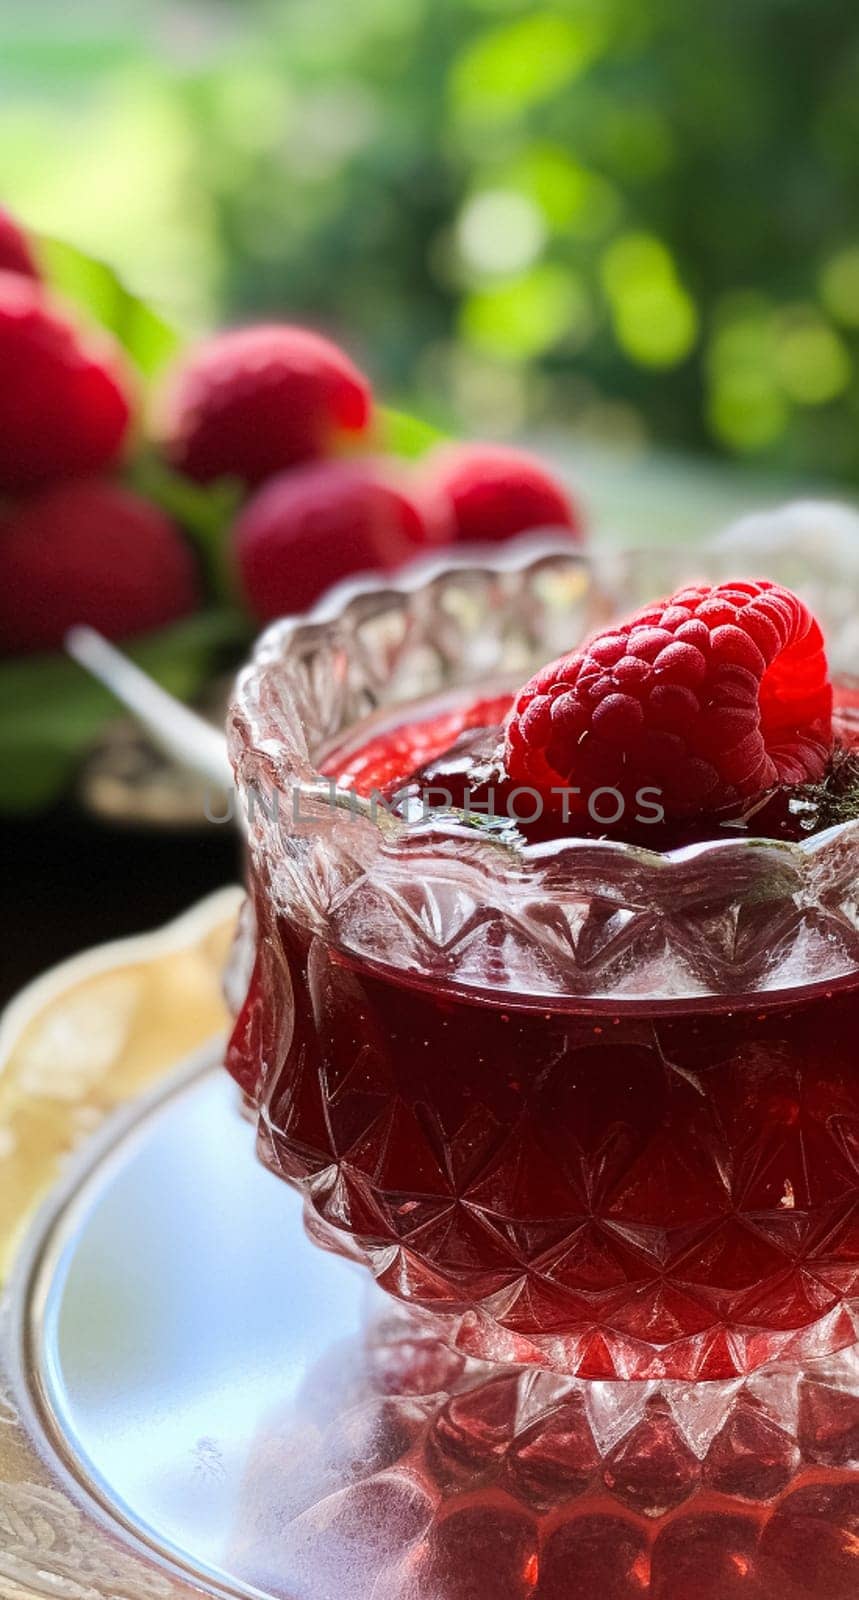 Raspberry jam and raspberries in a crystal bowl, country food and English recipe idea for menu, food blog and cookbook by Anneleven